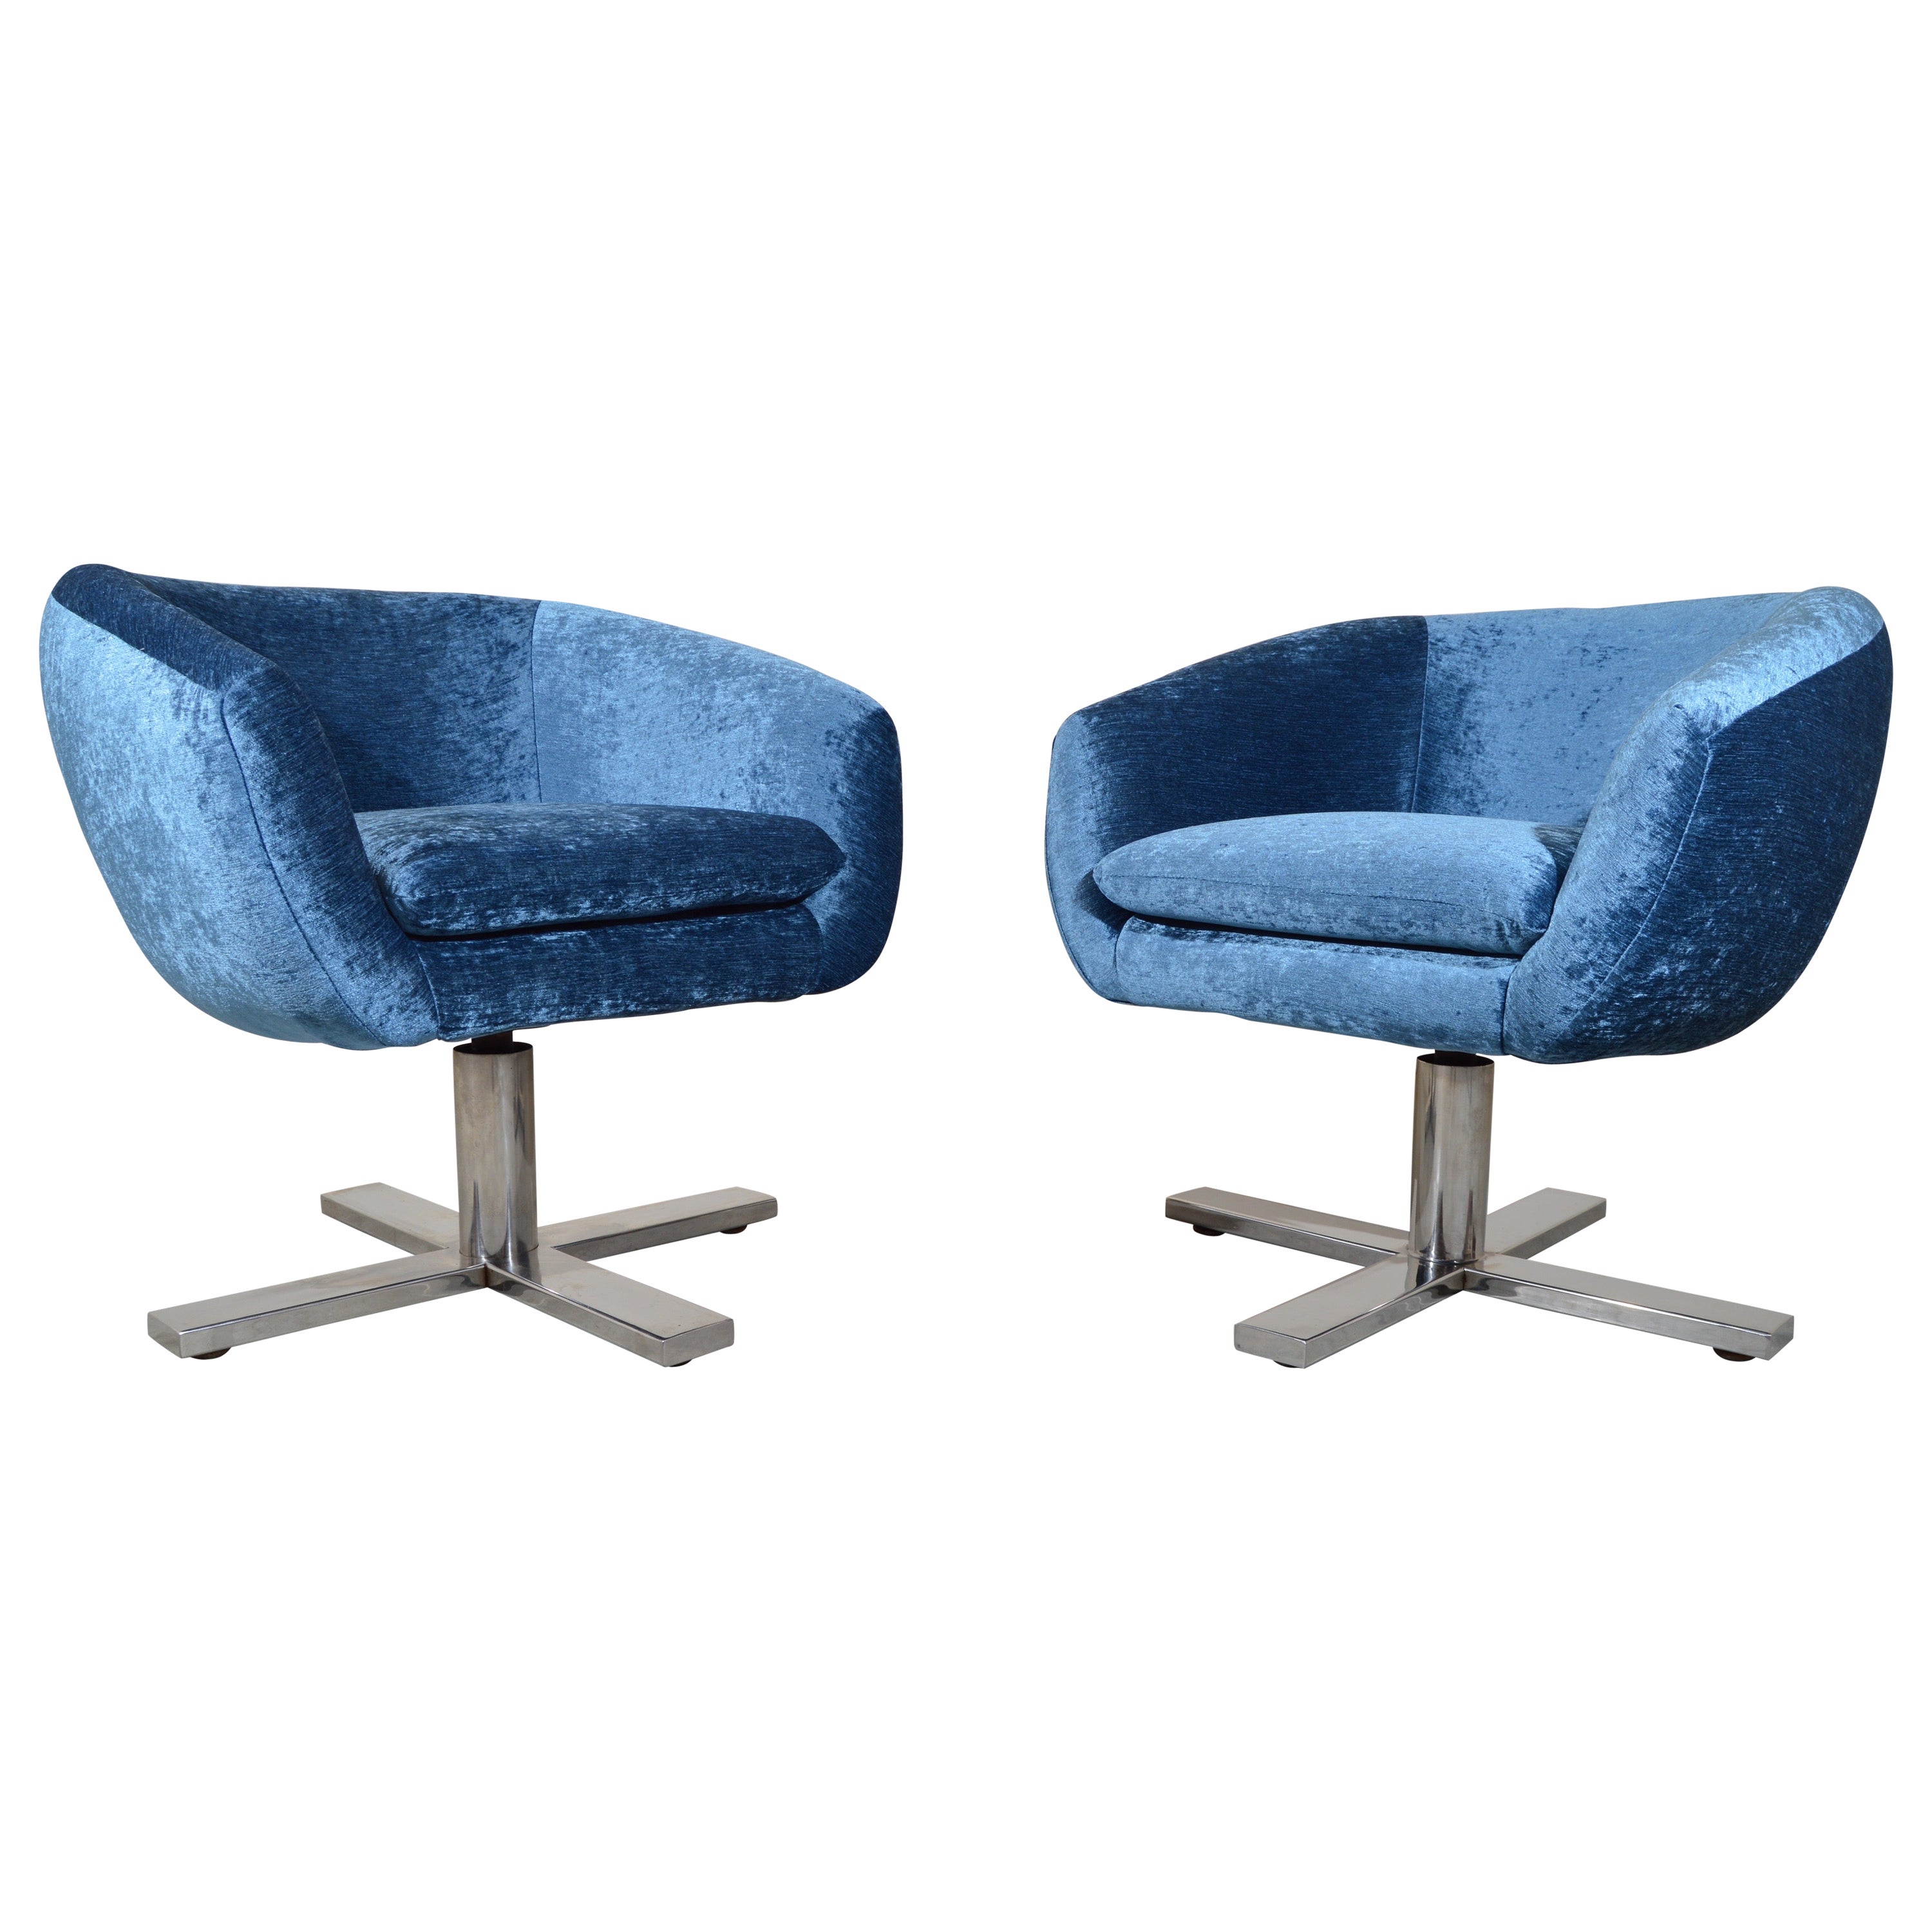 Pod Chair - 36 For Sale on 1stDibs | pod chairs for sale, pod 